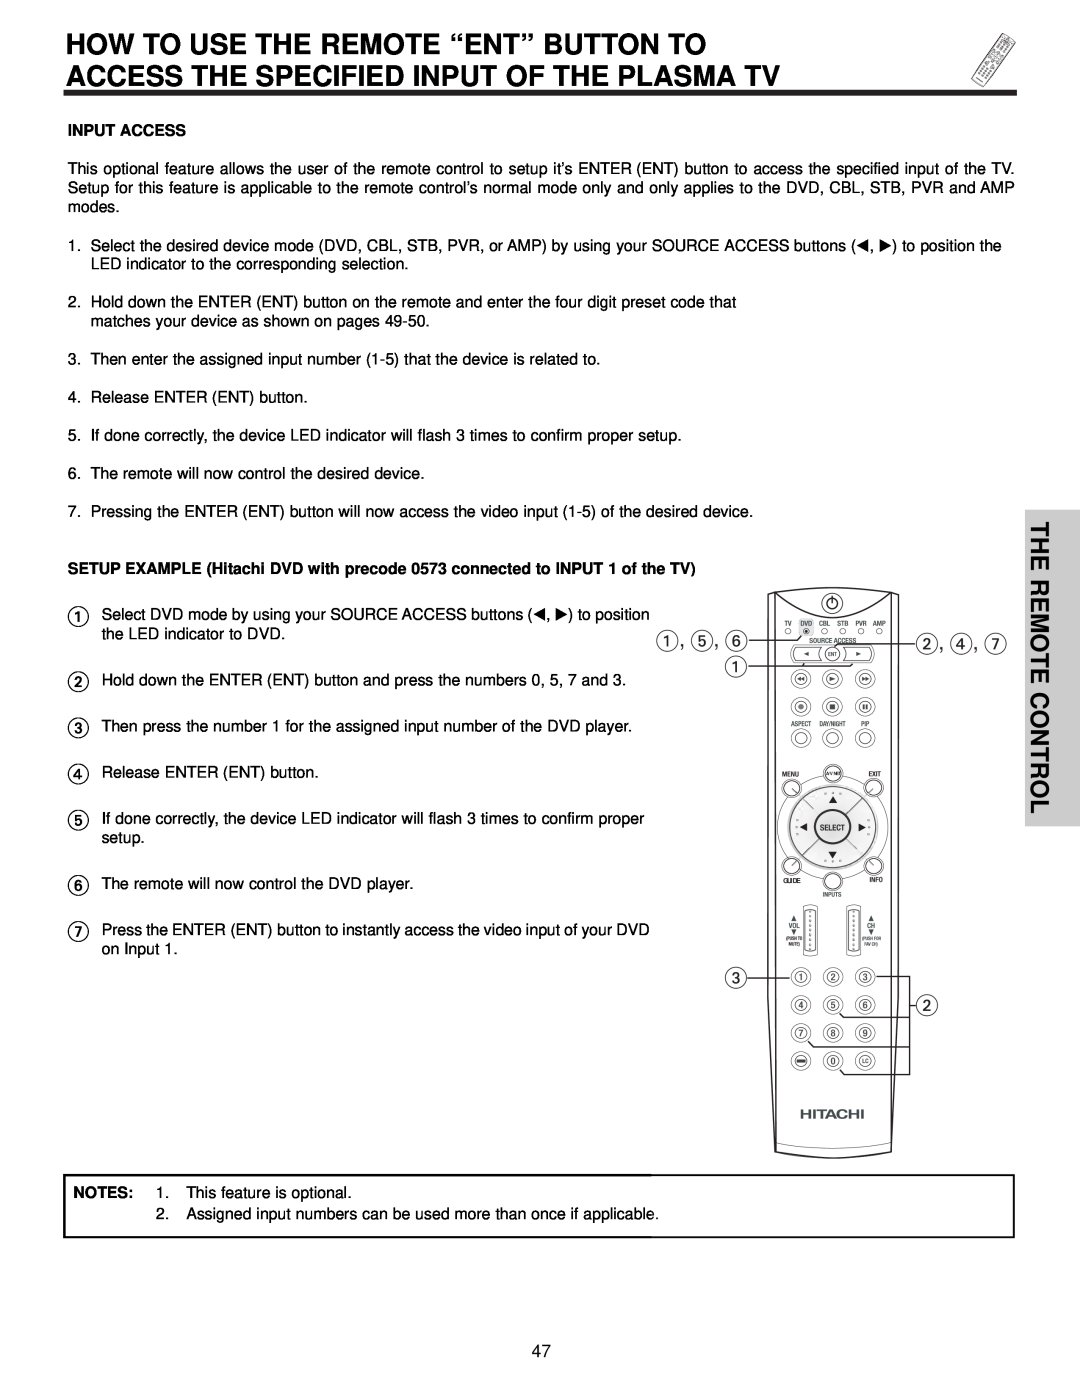 Hitachi 42HDX61, 55HDX61 important safety instructions The Remote, Control, Input Access 